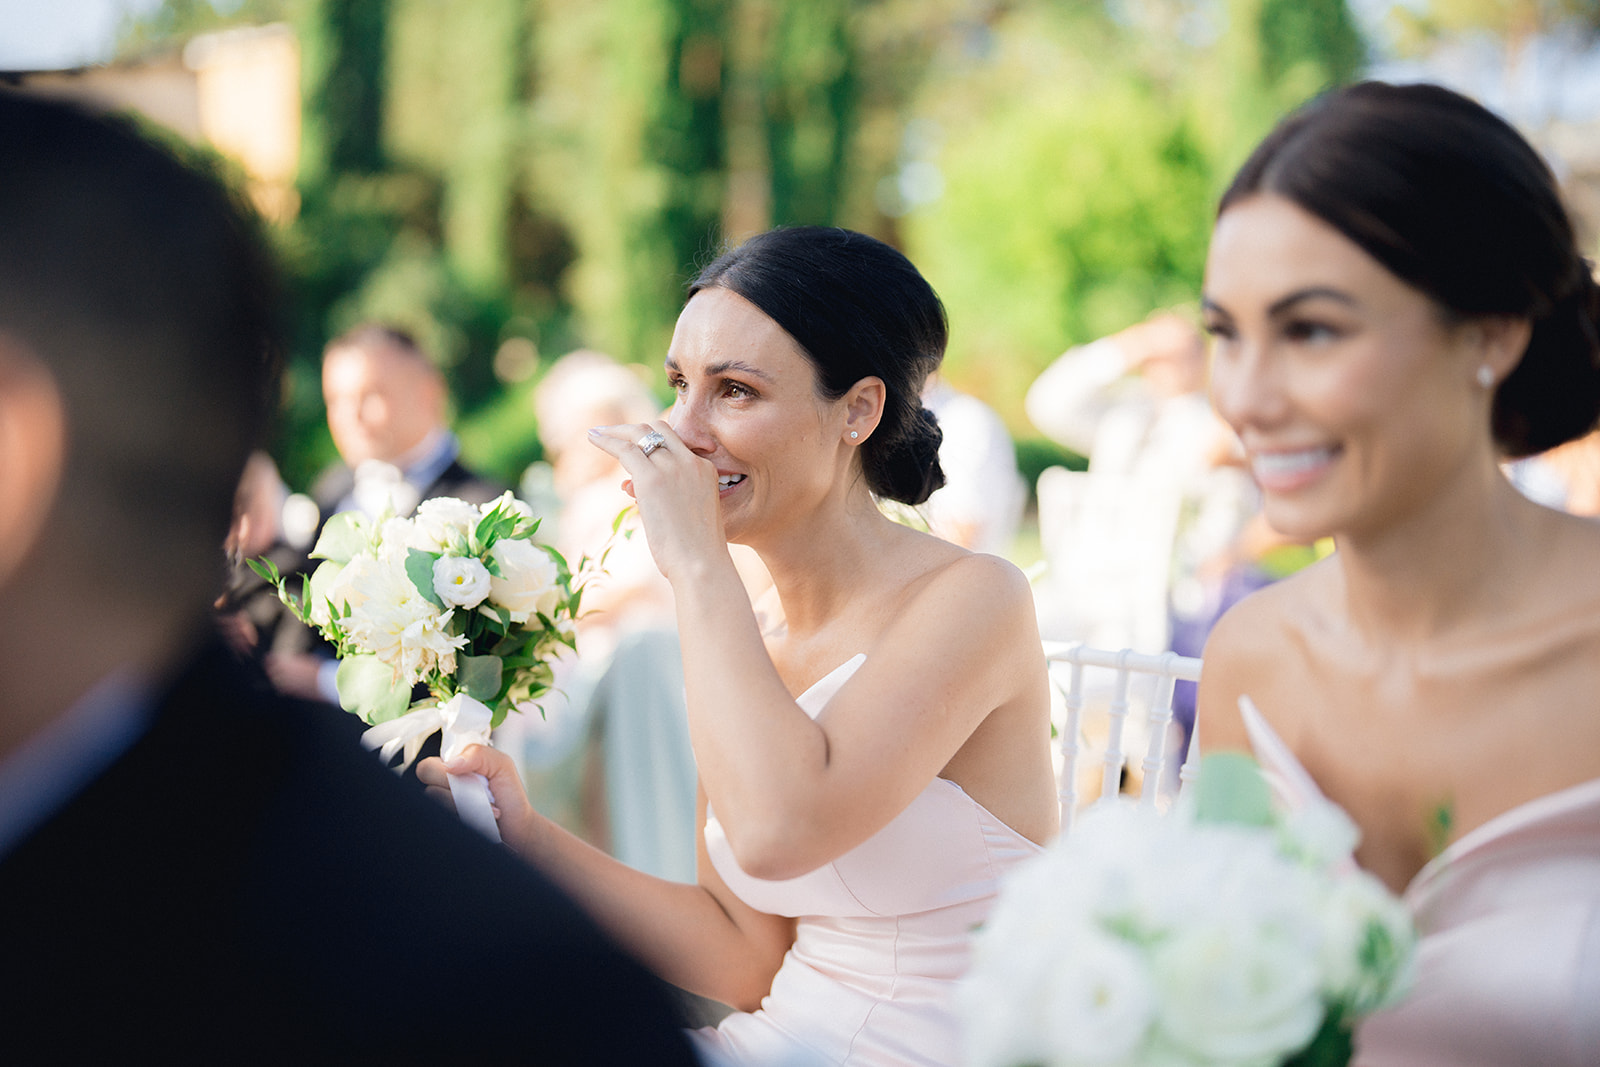 The sister of the bride is moved and in tears at her sister's wedding in Tuscany.